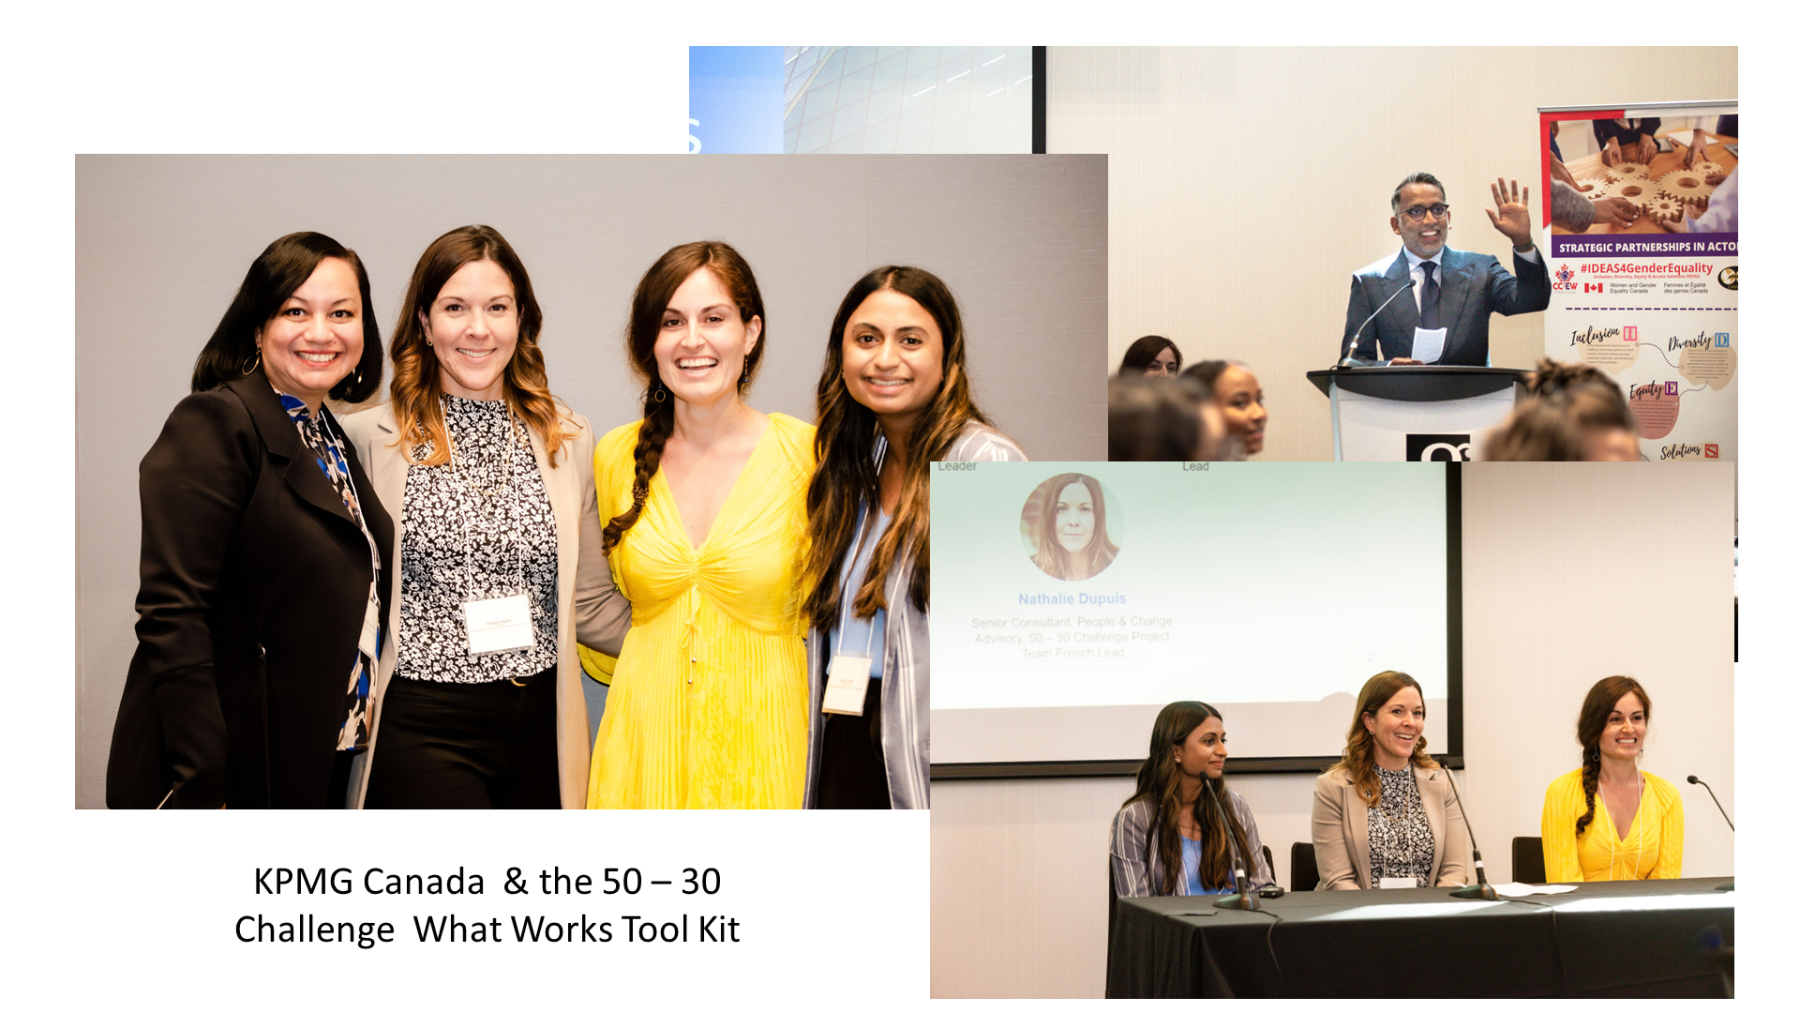 KPMG Canada & 50 - 30 Challenge What Works Tool Kit